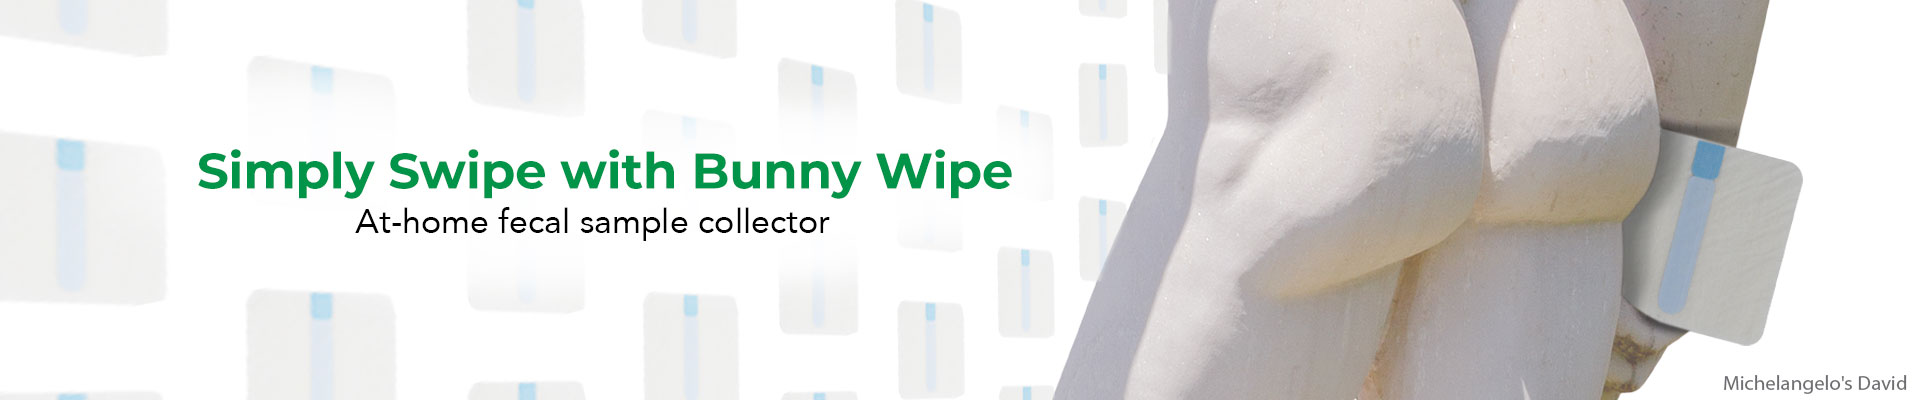 Bunny Wipe banner image - A picture of Michelangelo's David with Bunny Wipe Stool Collector